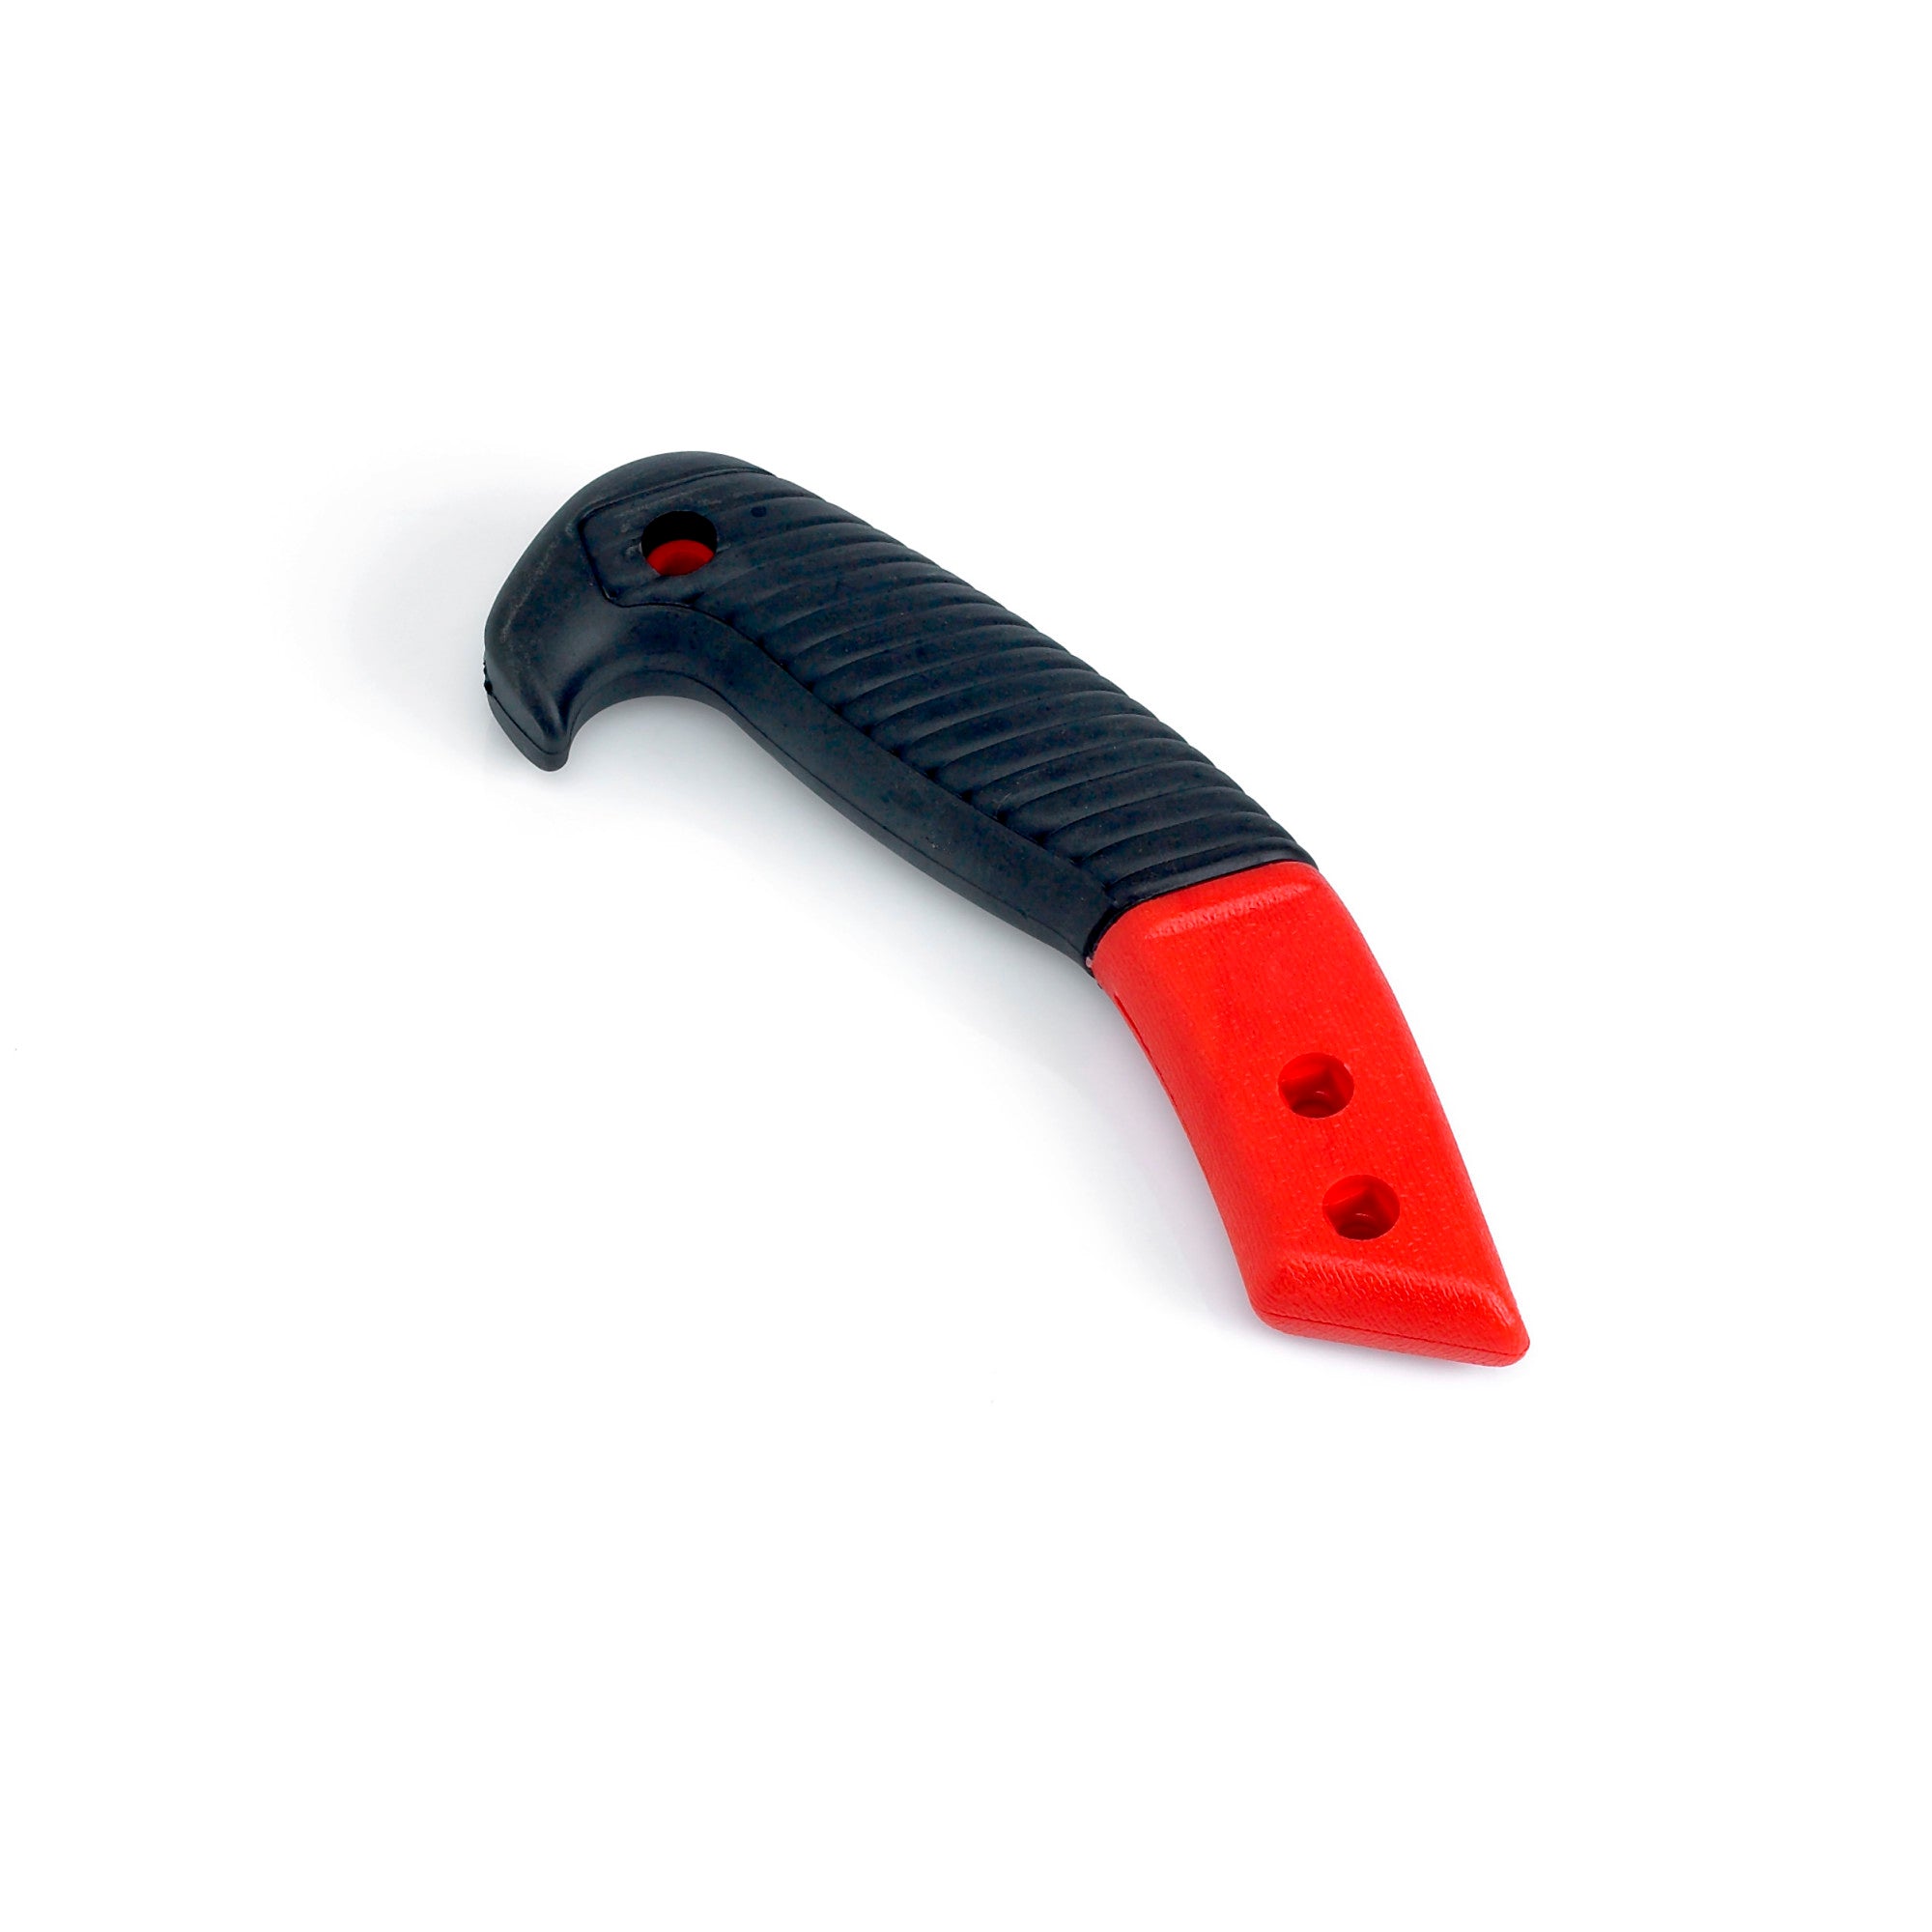 Replacement Handle for Pruning Saw